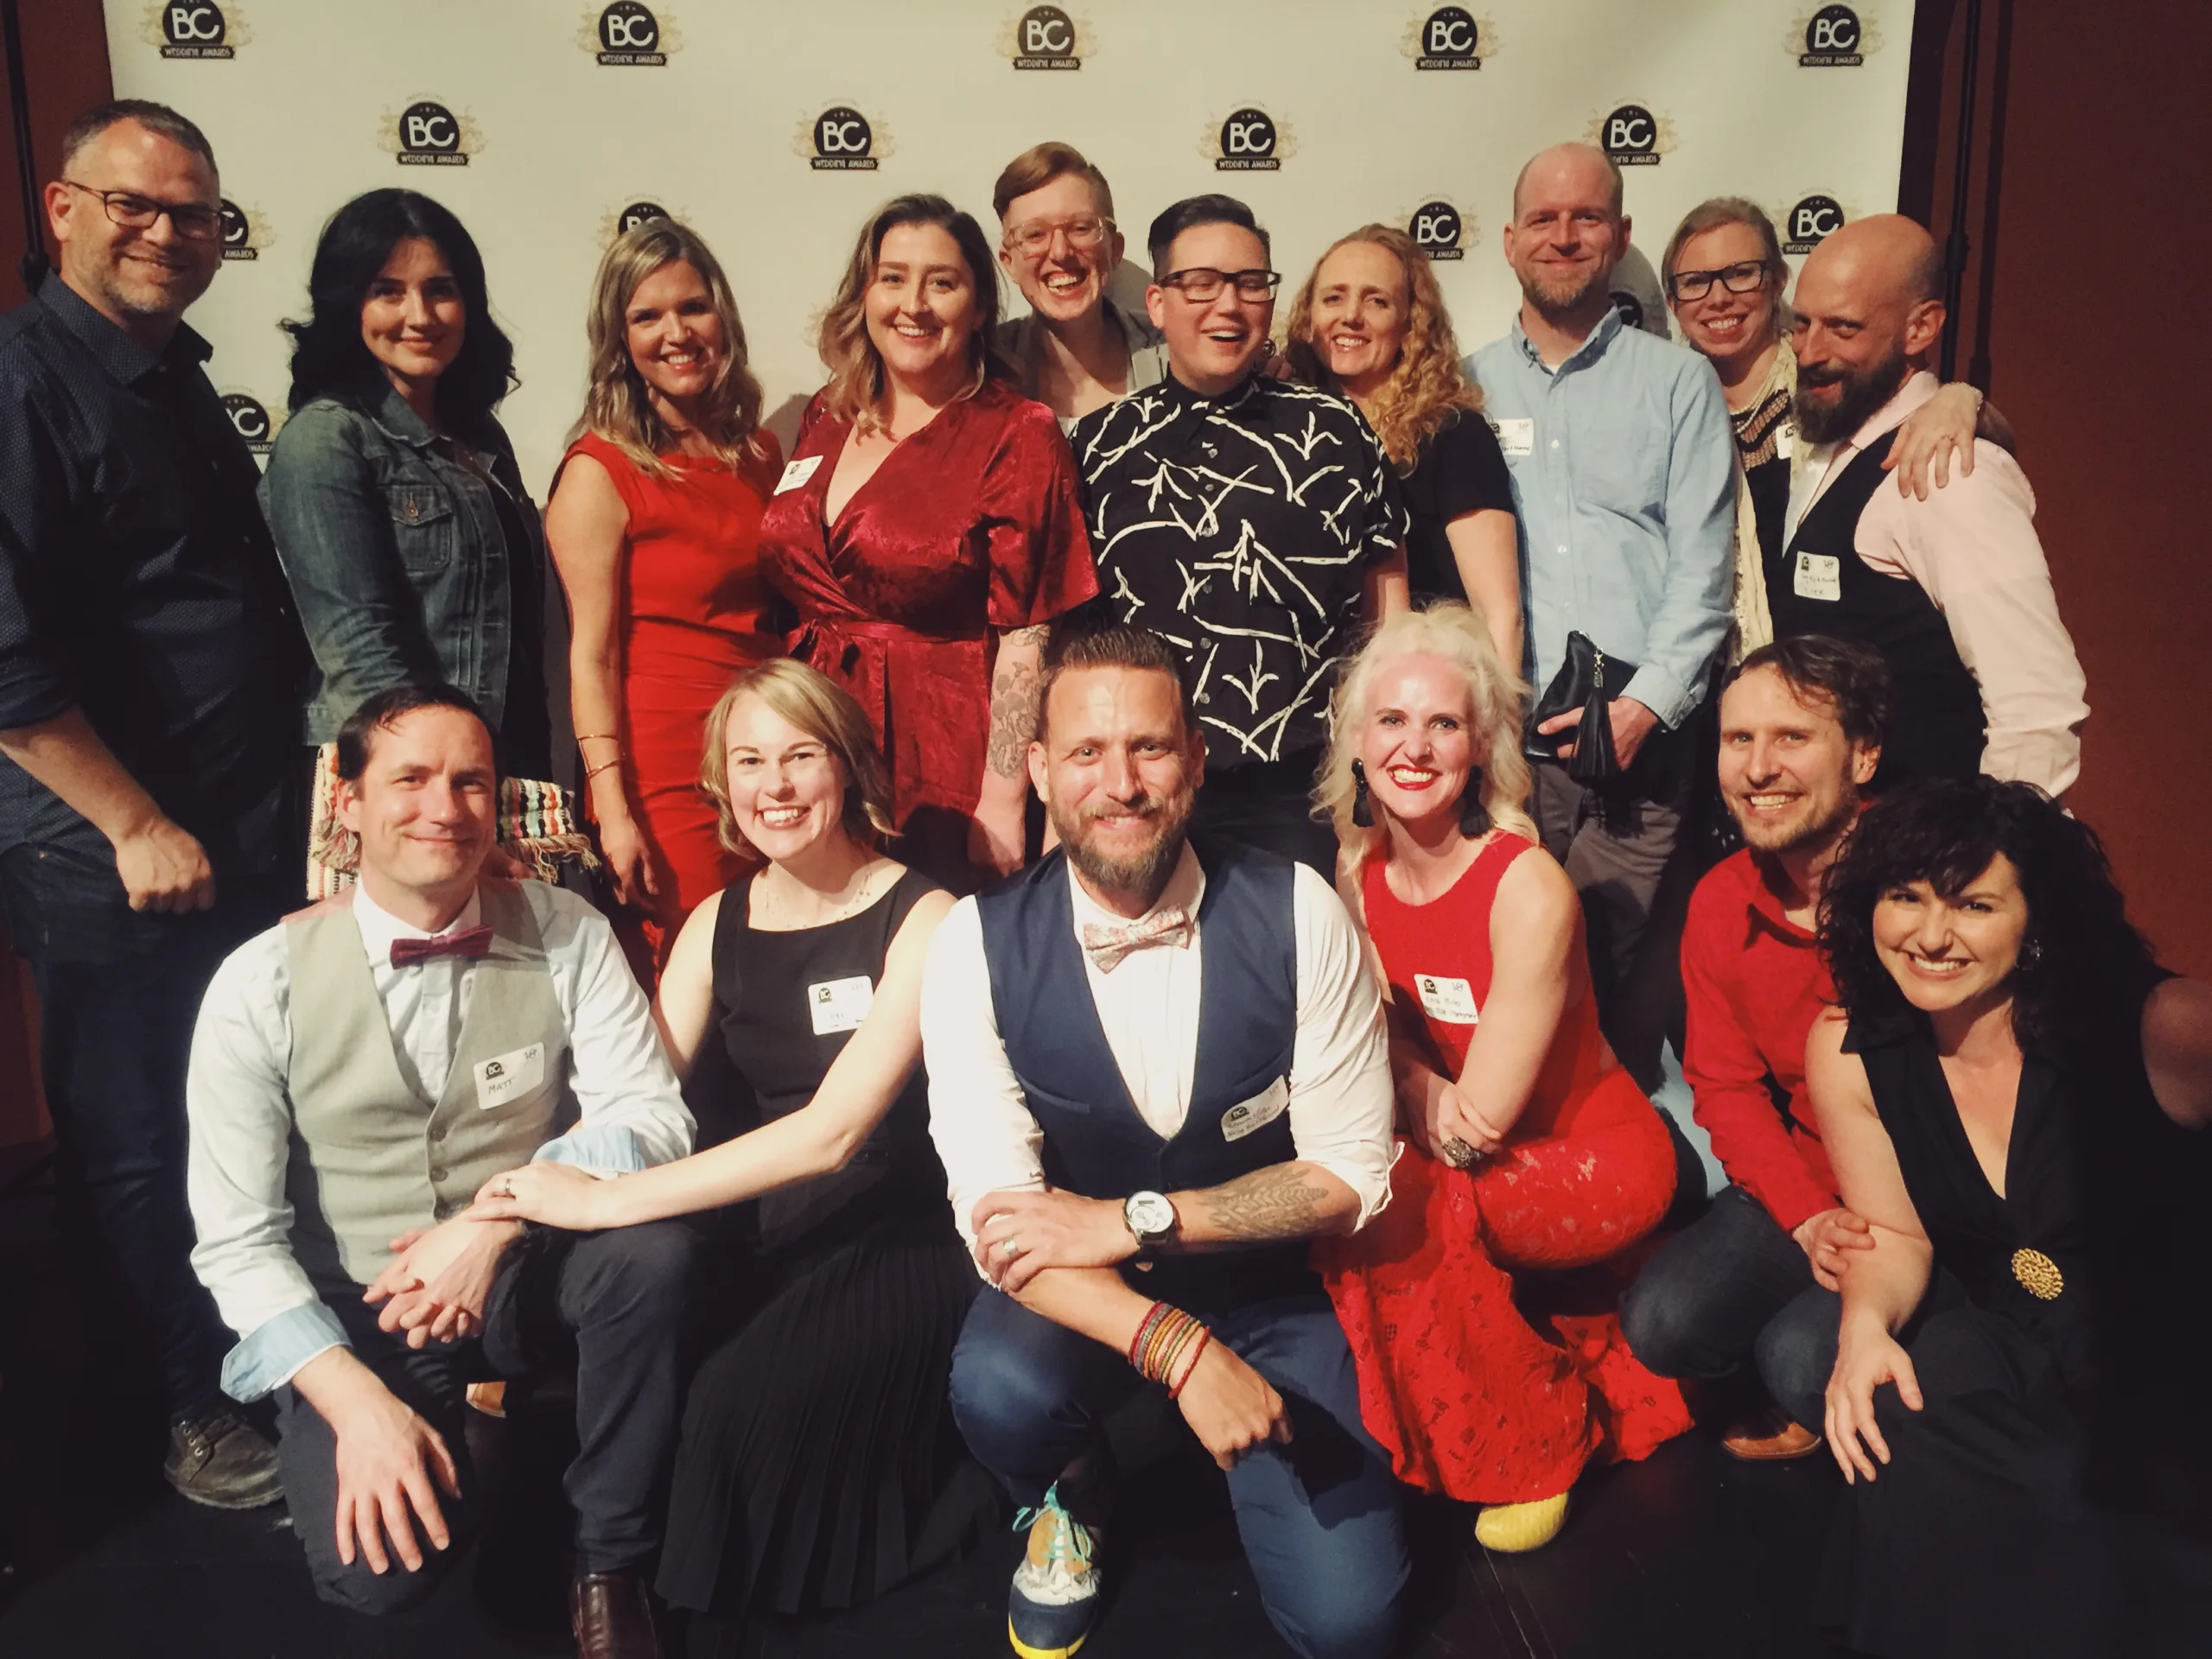 The YHM Team at the 2019 BC Wedding Awards